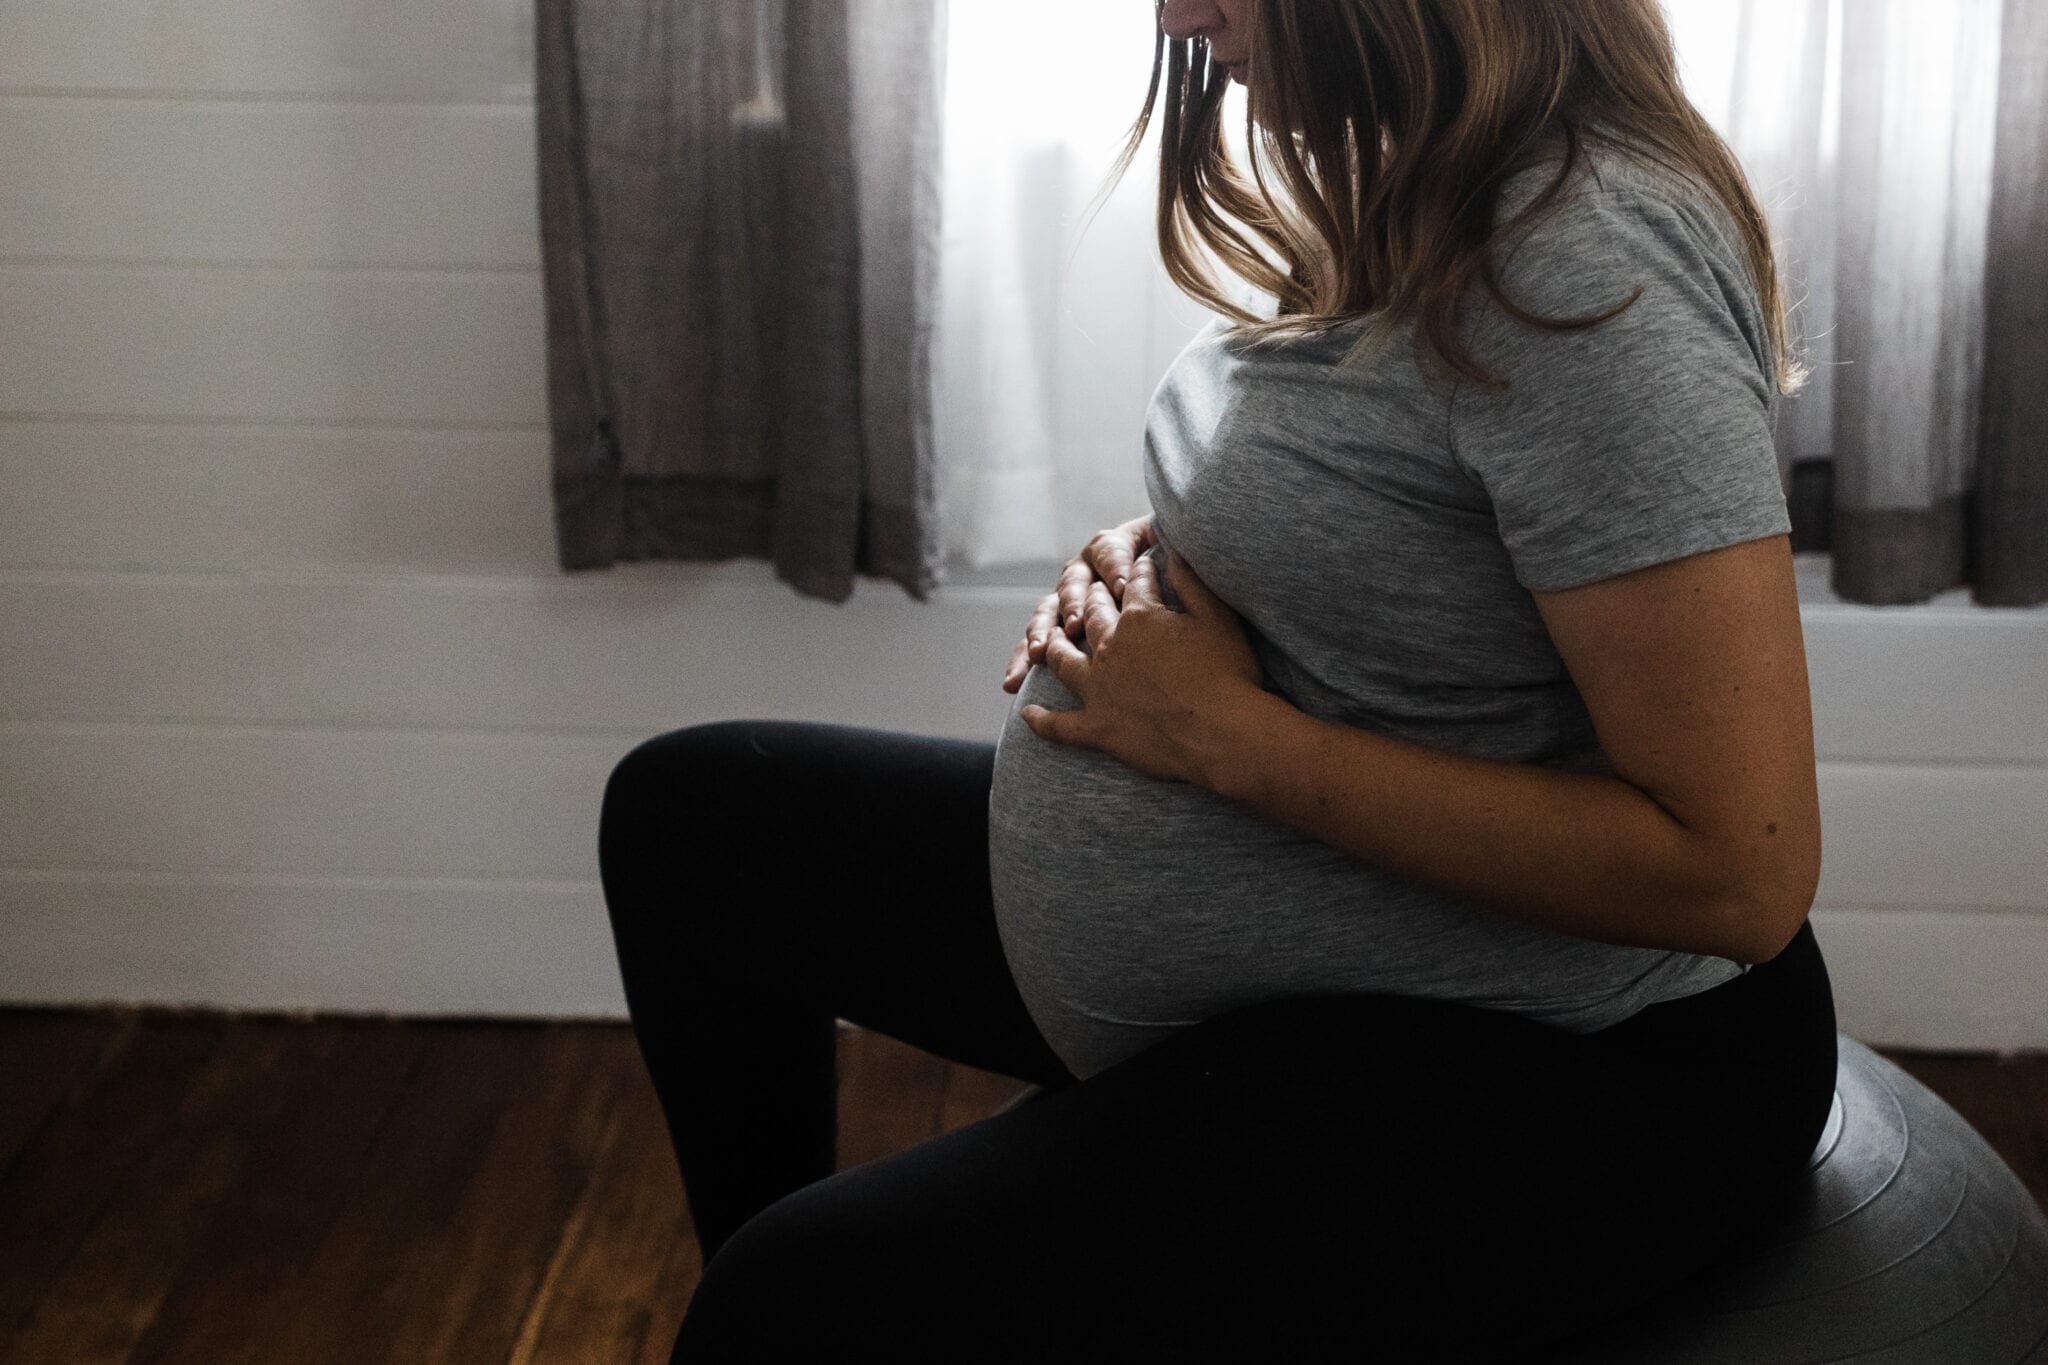 Full term pregnant person sitting on an exercise ball with her hands on her stomach New Guidance Expands the Pregnant Workers Fairness Act